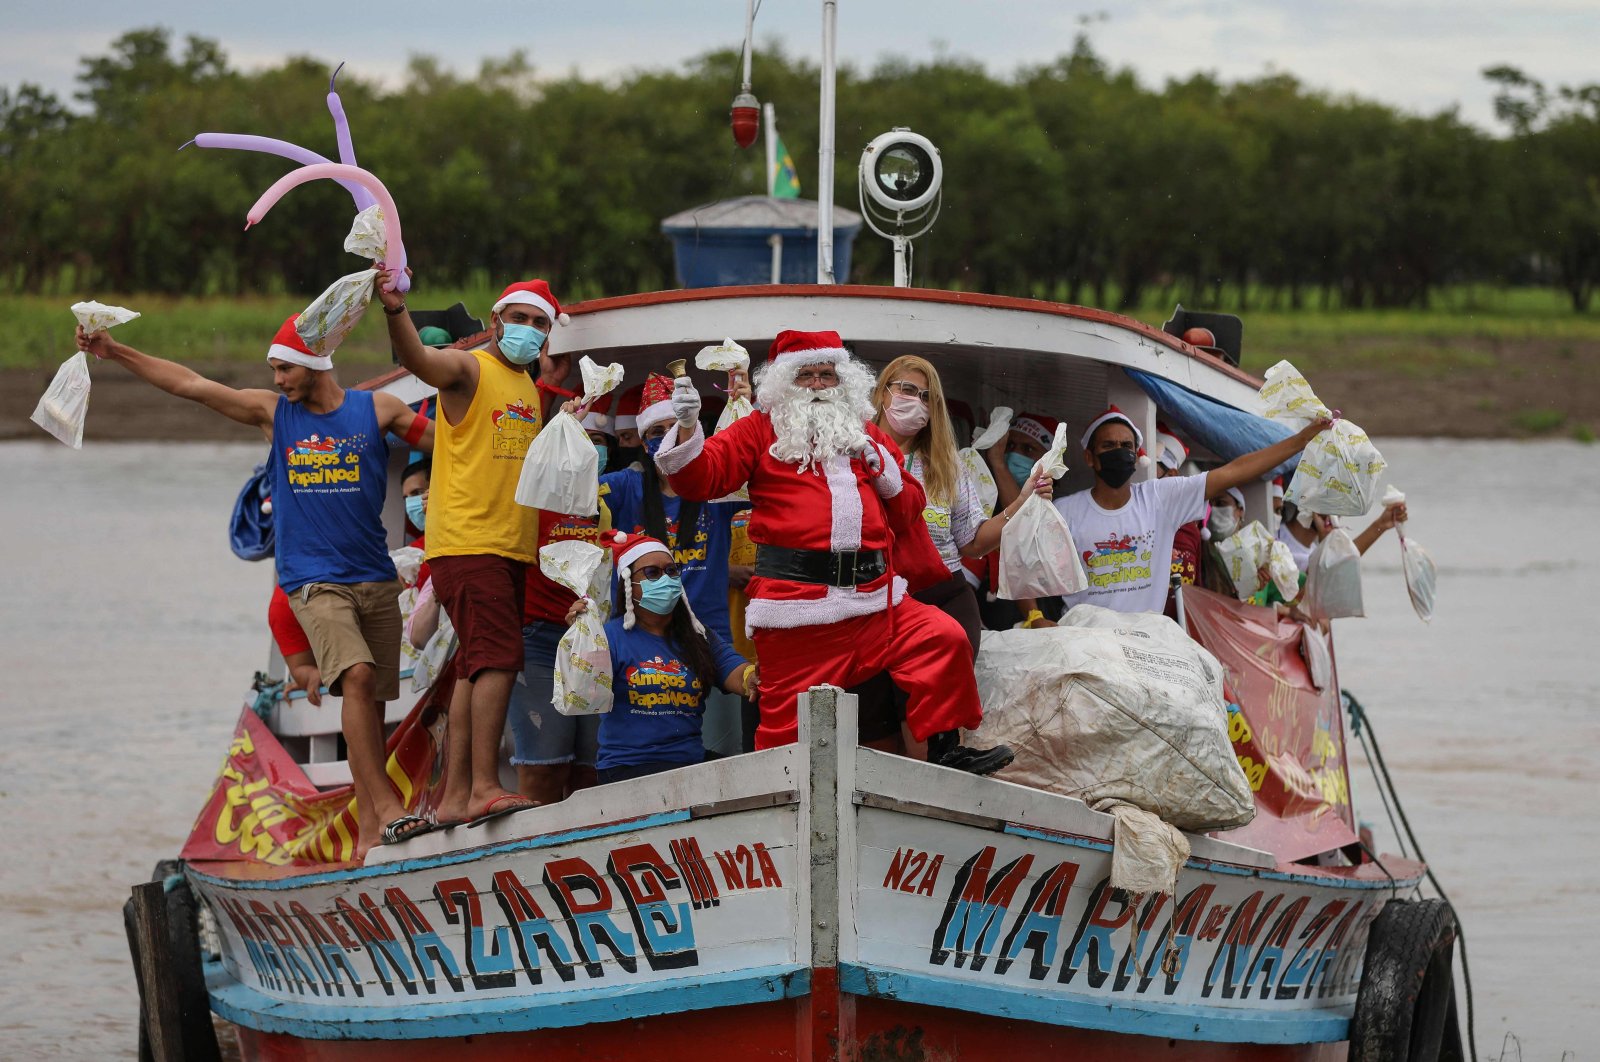 A member of the &quot;Amigos do Papai Noel&quot; (Friends of Santa Claus) group, wearing a Santa Claus costume, arrives to give presents to children, Careiro da Varzea, Brazil, Dec. 18, 2021. (AFP Photo)